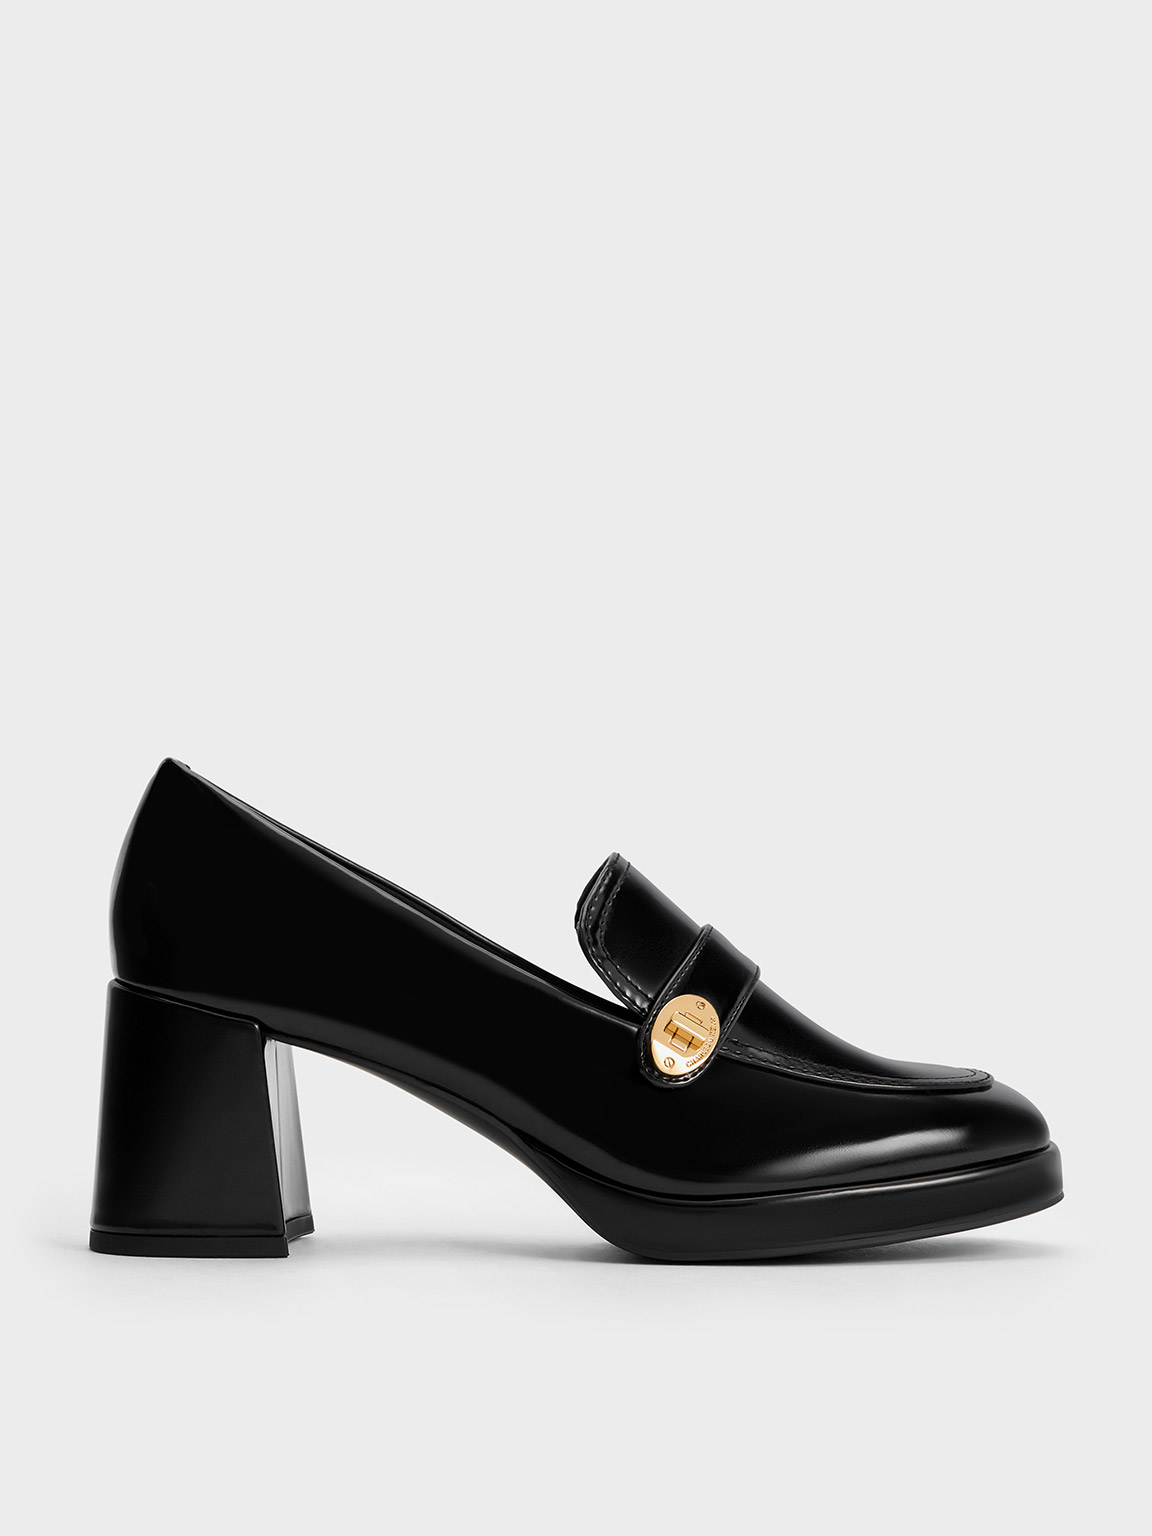 Metallic Accent Loafer Pumps